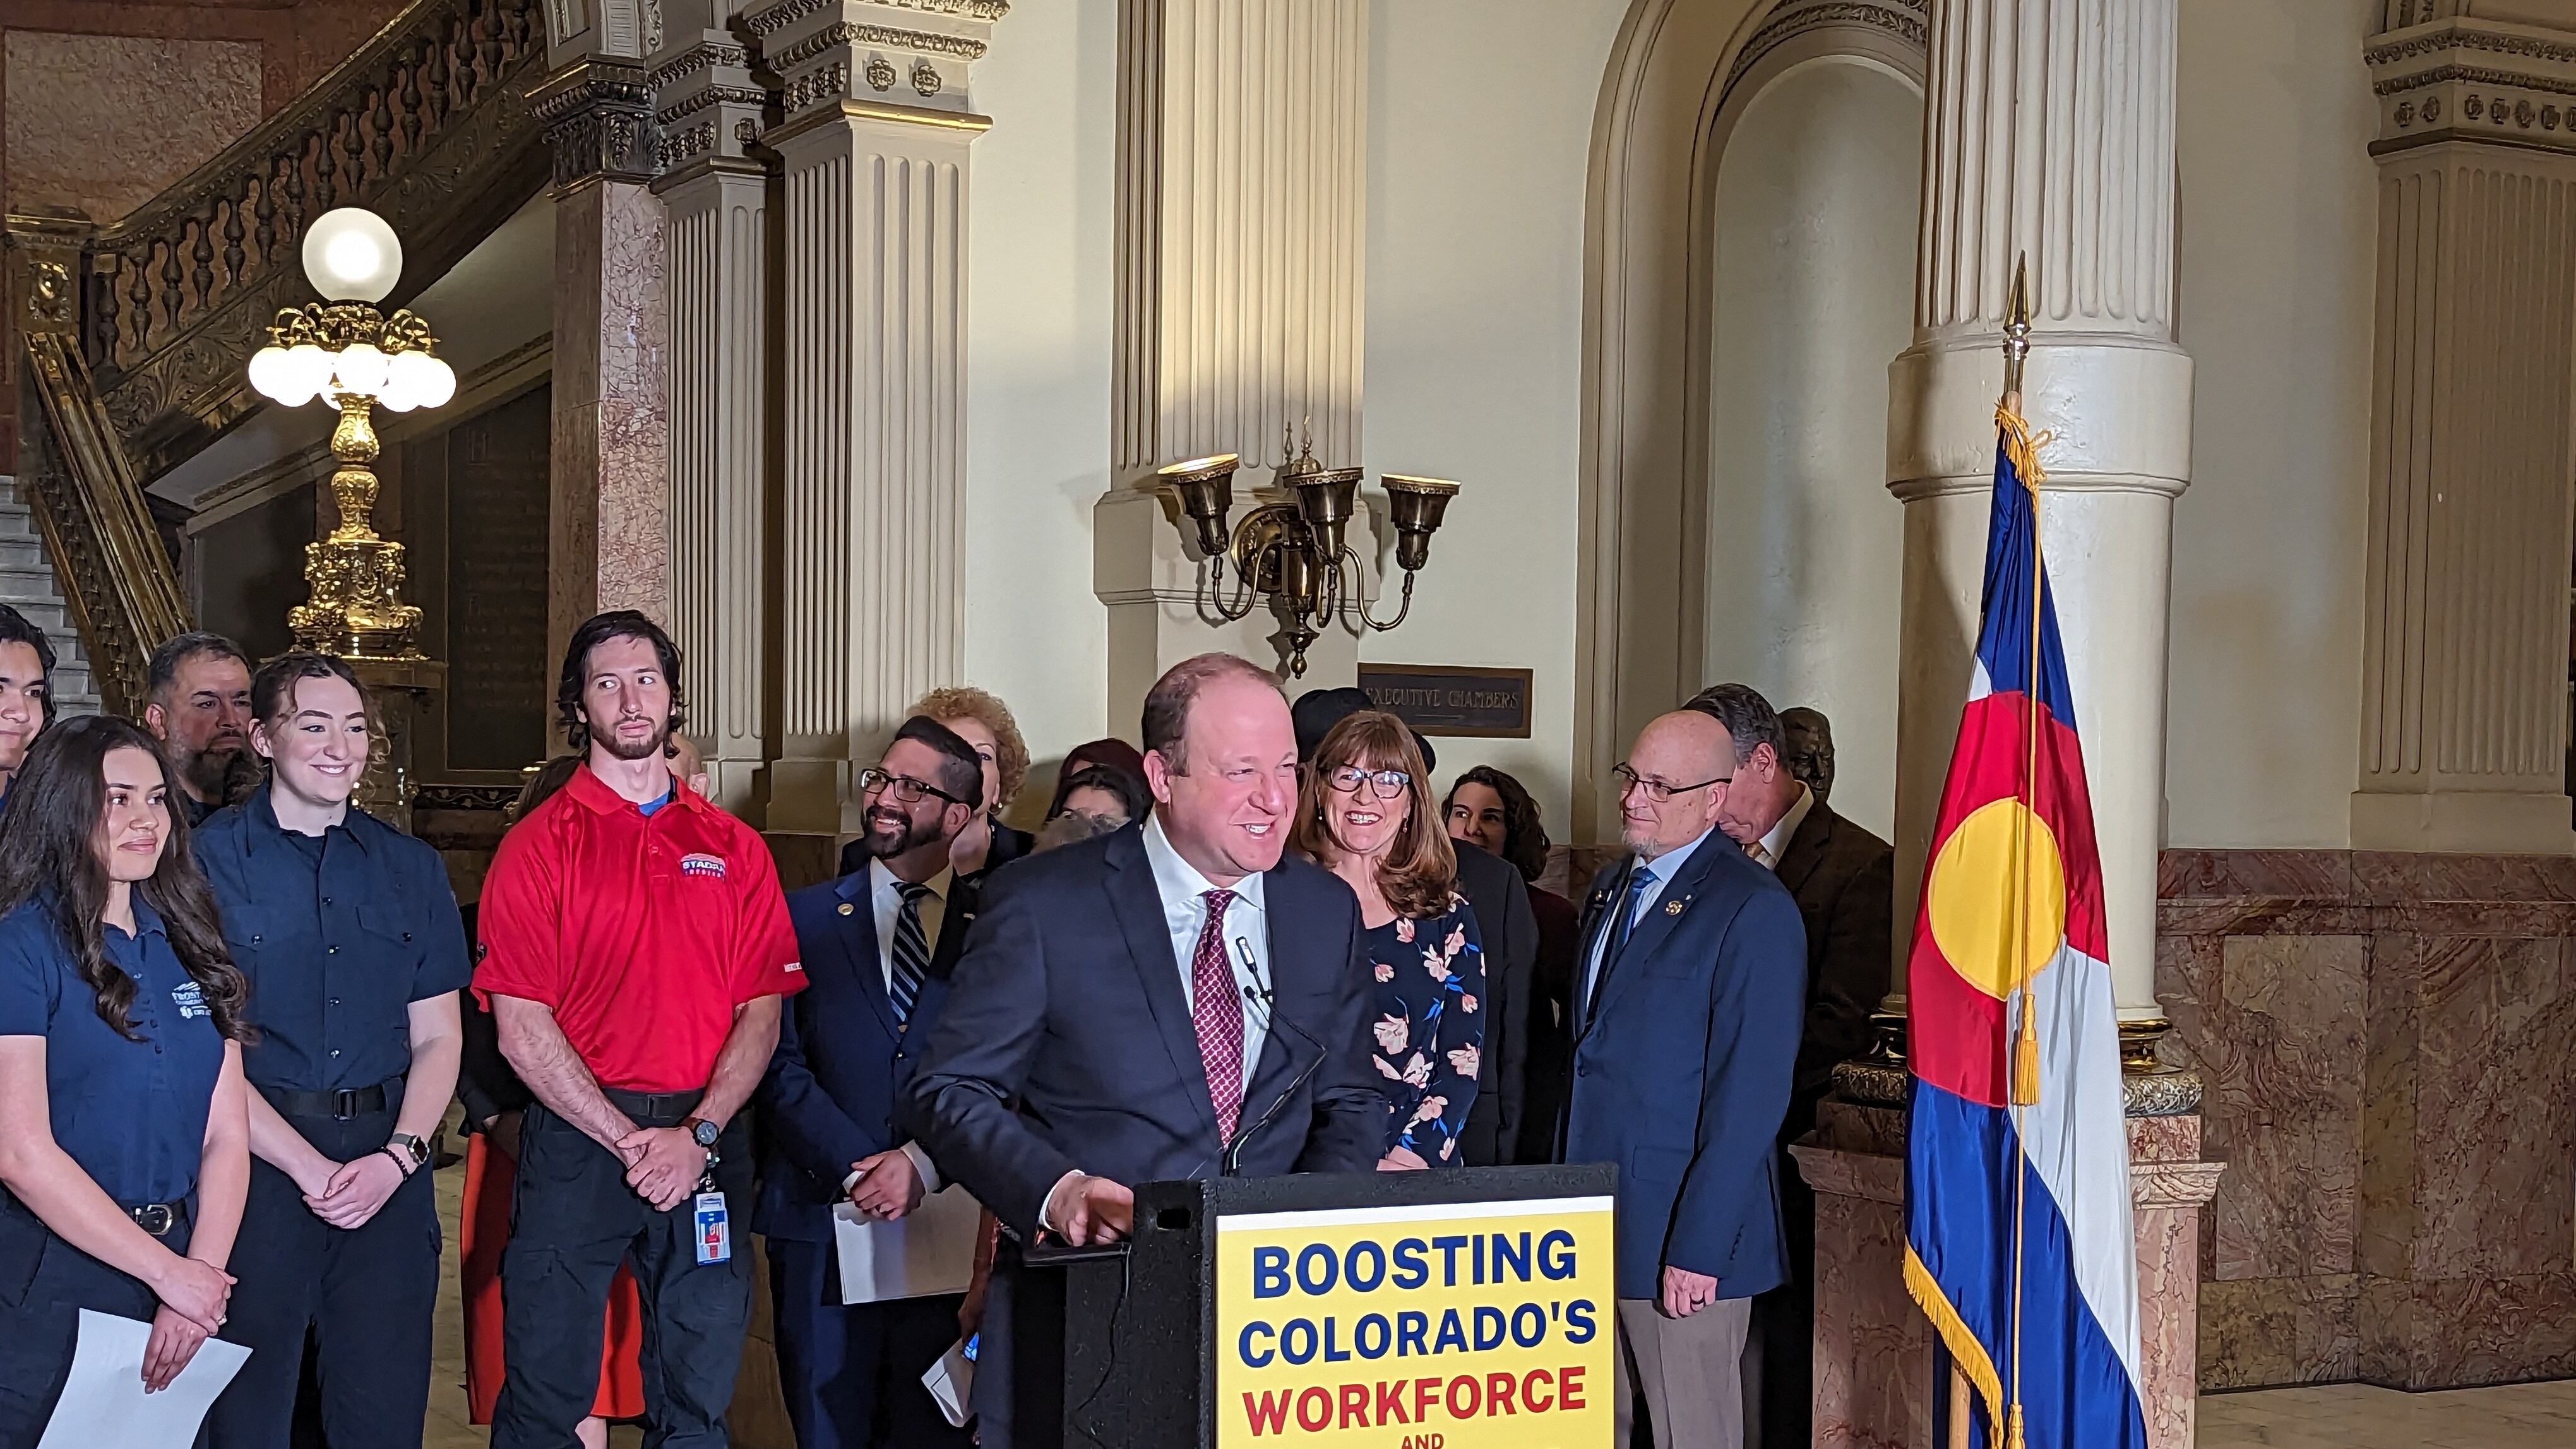 Colorado’s governor in a blue suit stands at a podium with a yellow sign surrounded by people.